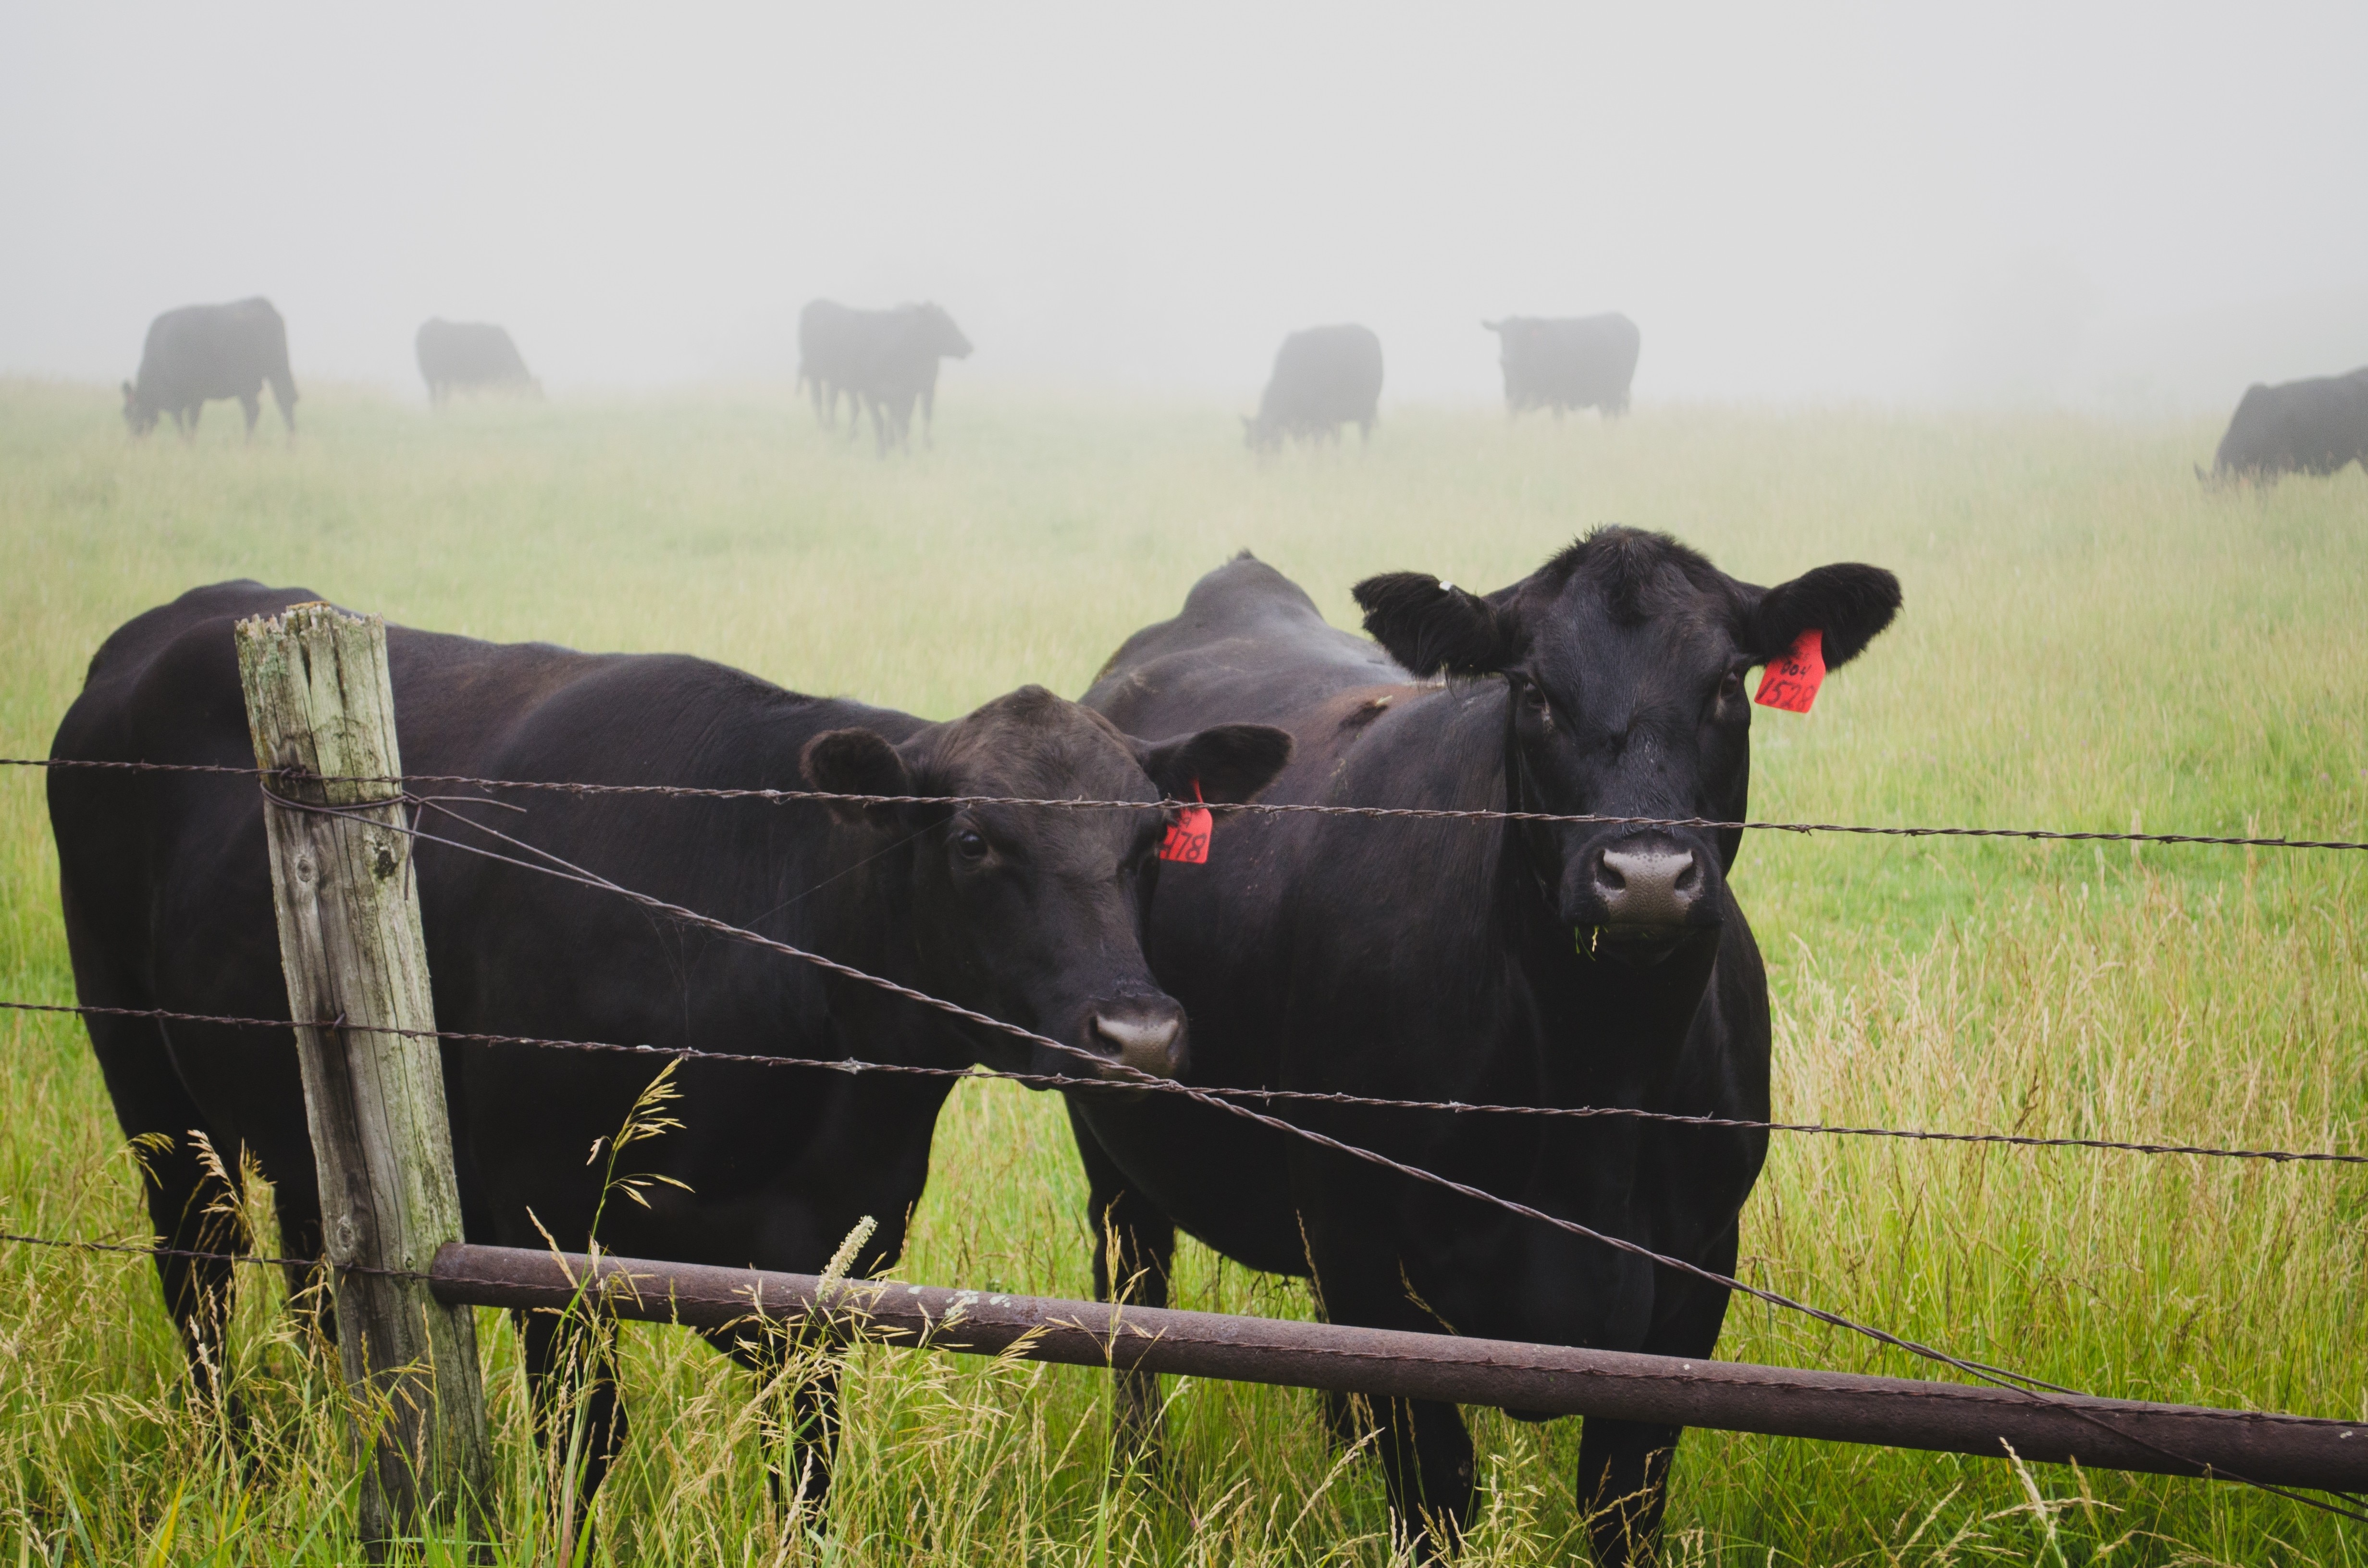 two black cows near metal wire fence